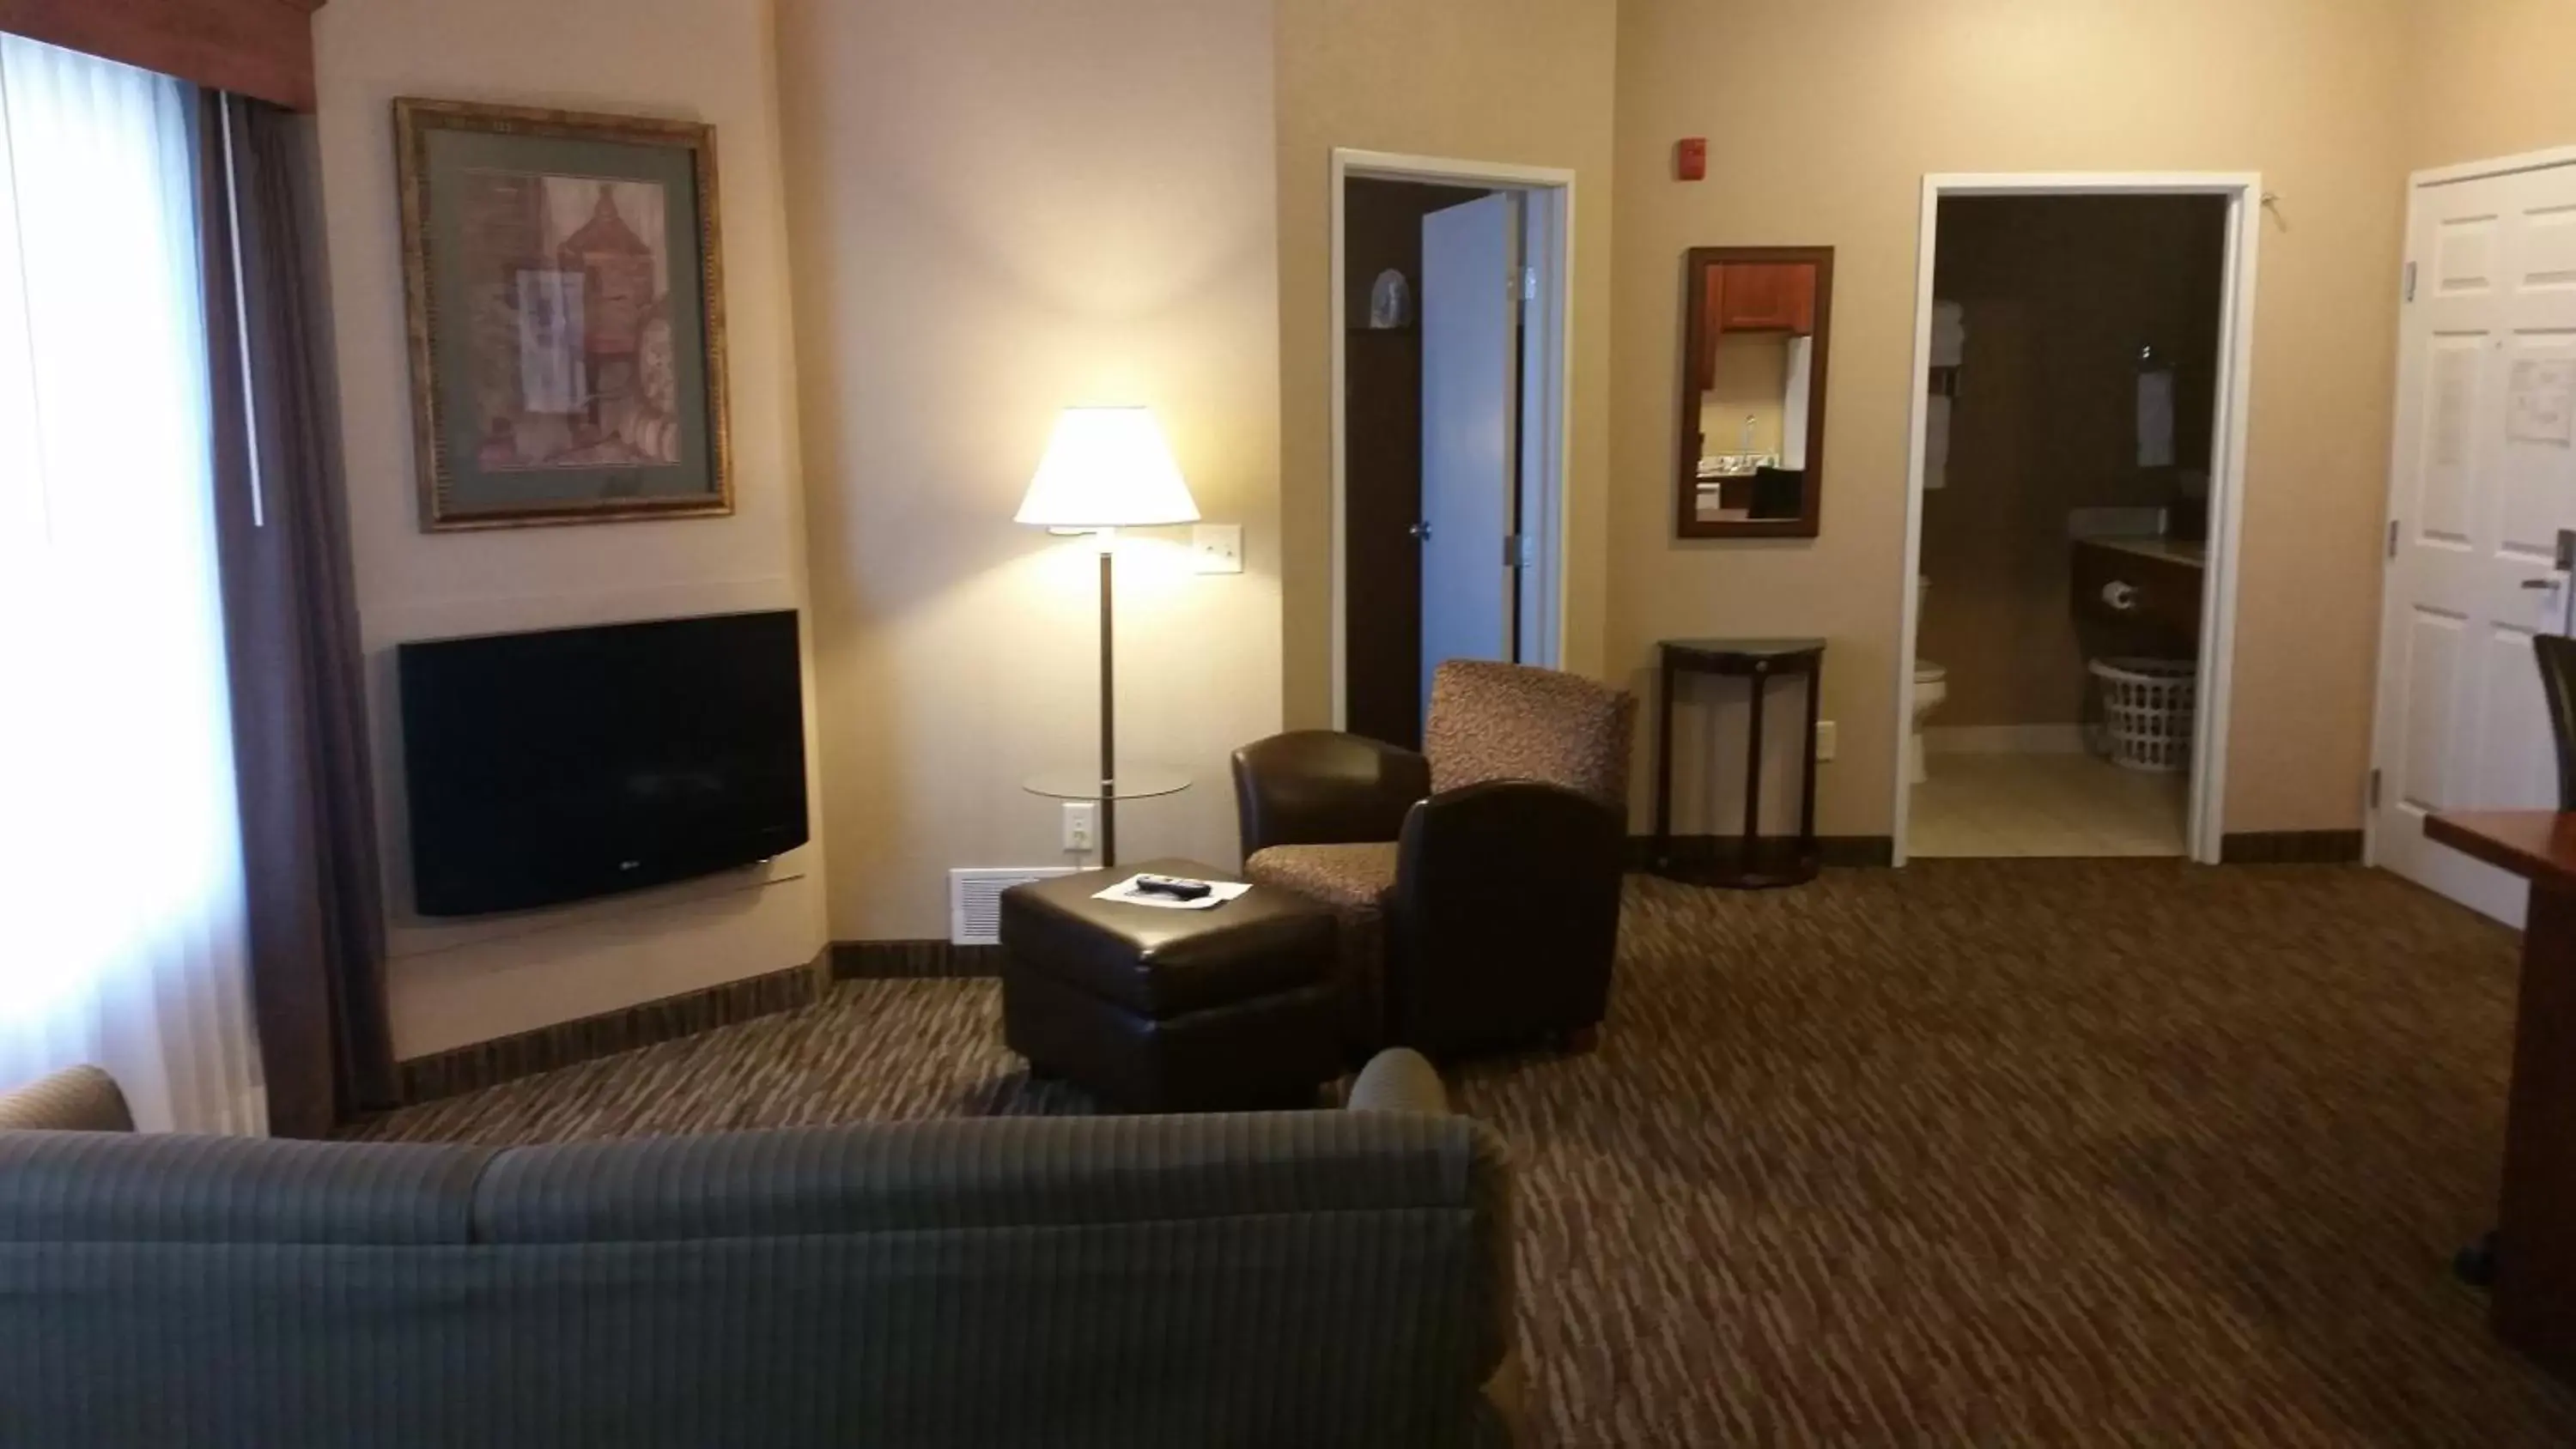 Seating Area in GrandStay Residential Suites Hotel - Eau Claire